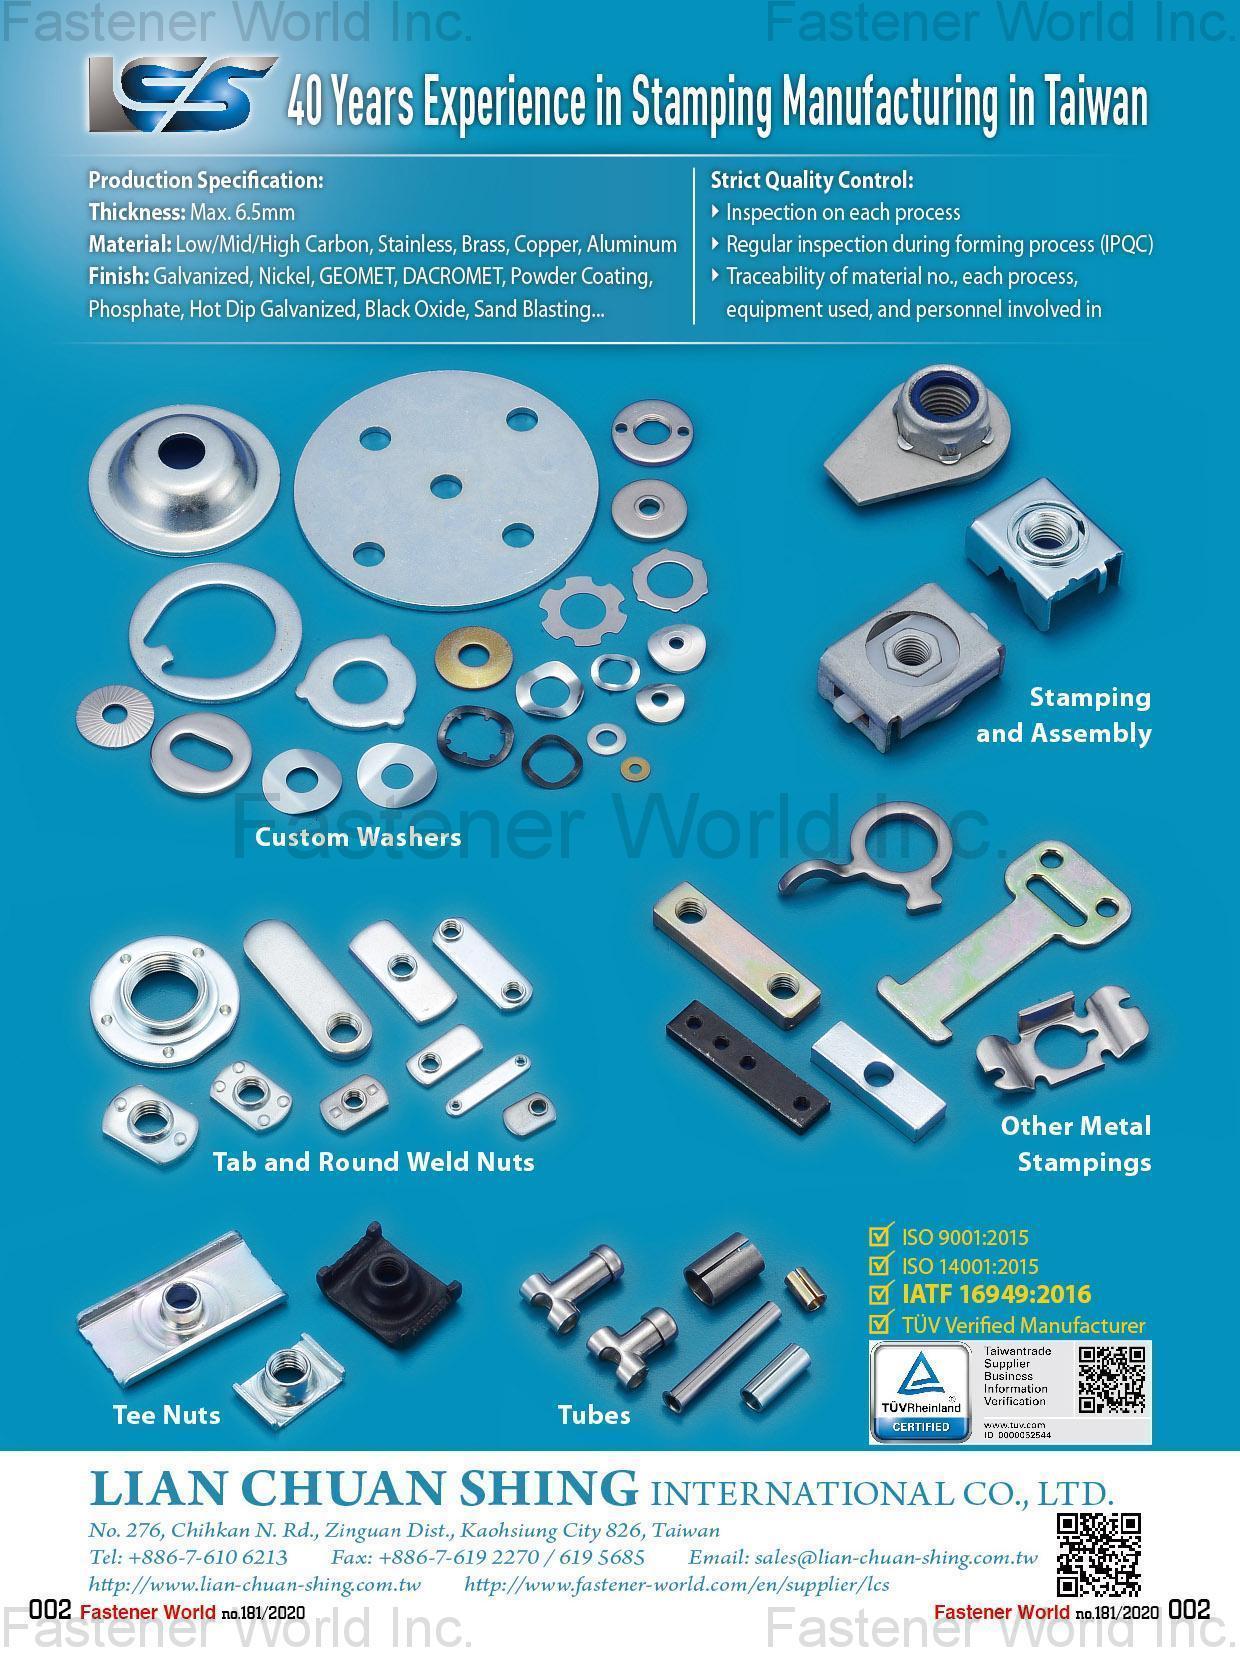 LIAN CHUAN SHING INTERNATIONAL CO., LTD. , Custom Washers, Stamping and Assembly, Tab and Round Weld Nuts, Tee Nuts, Tubes, Other Metal Stampings , Weld Nuts